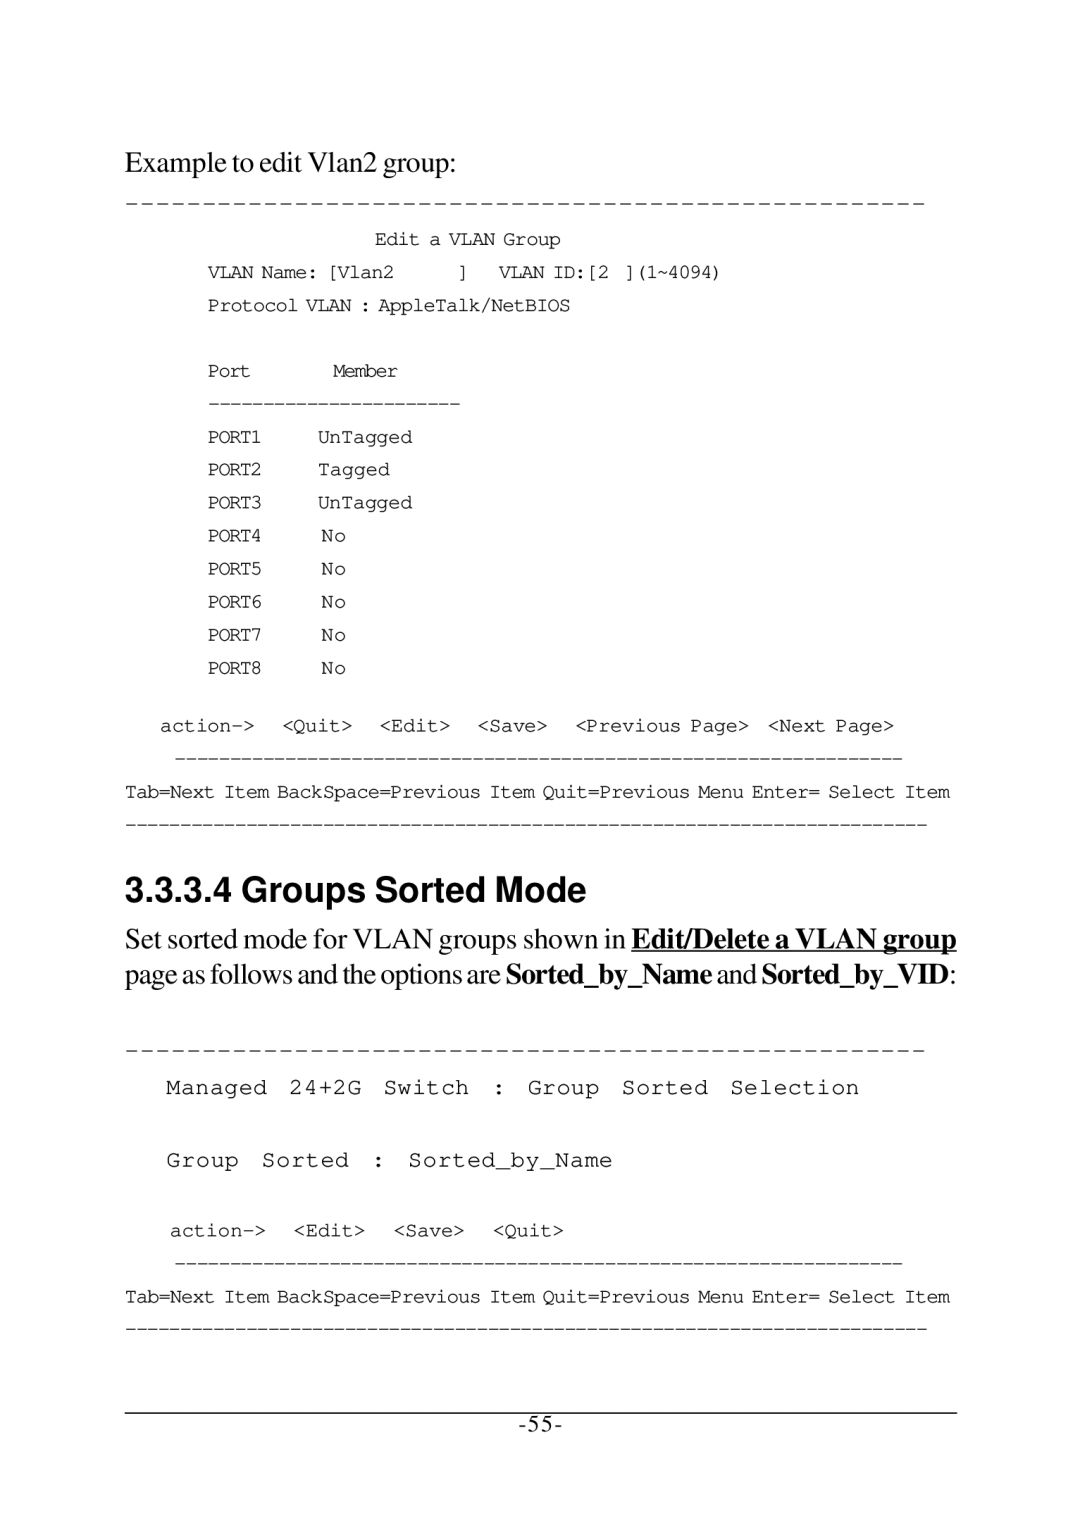 KTI Networks KS-2260 operation manual Groups Sorted Mode, Example to edit Vlan2 group 